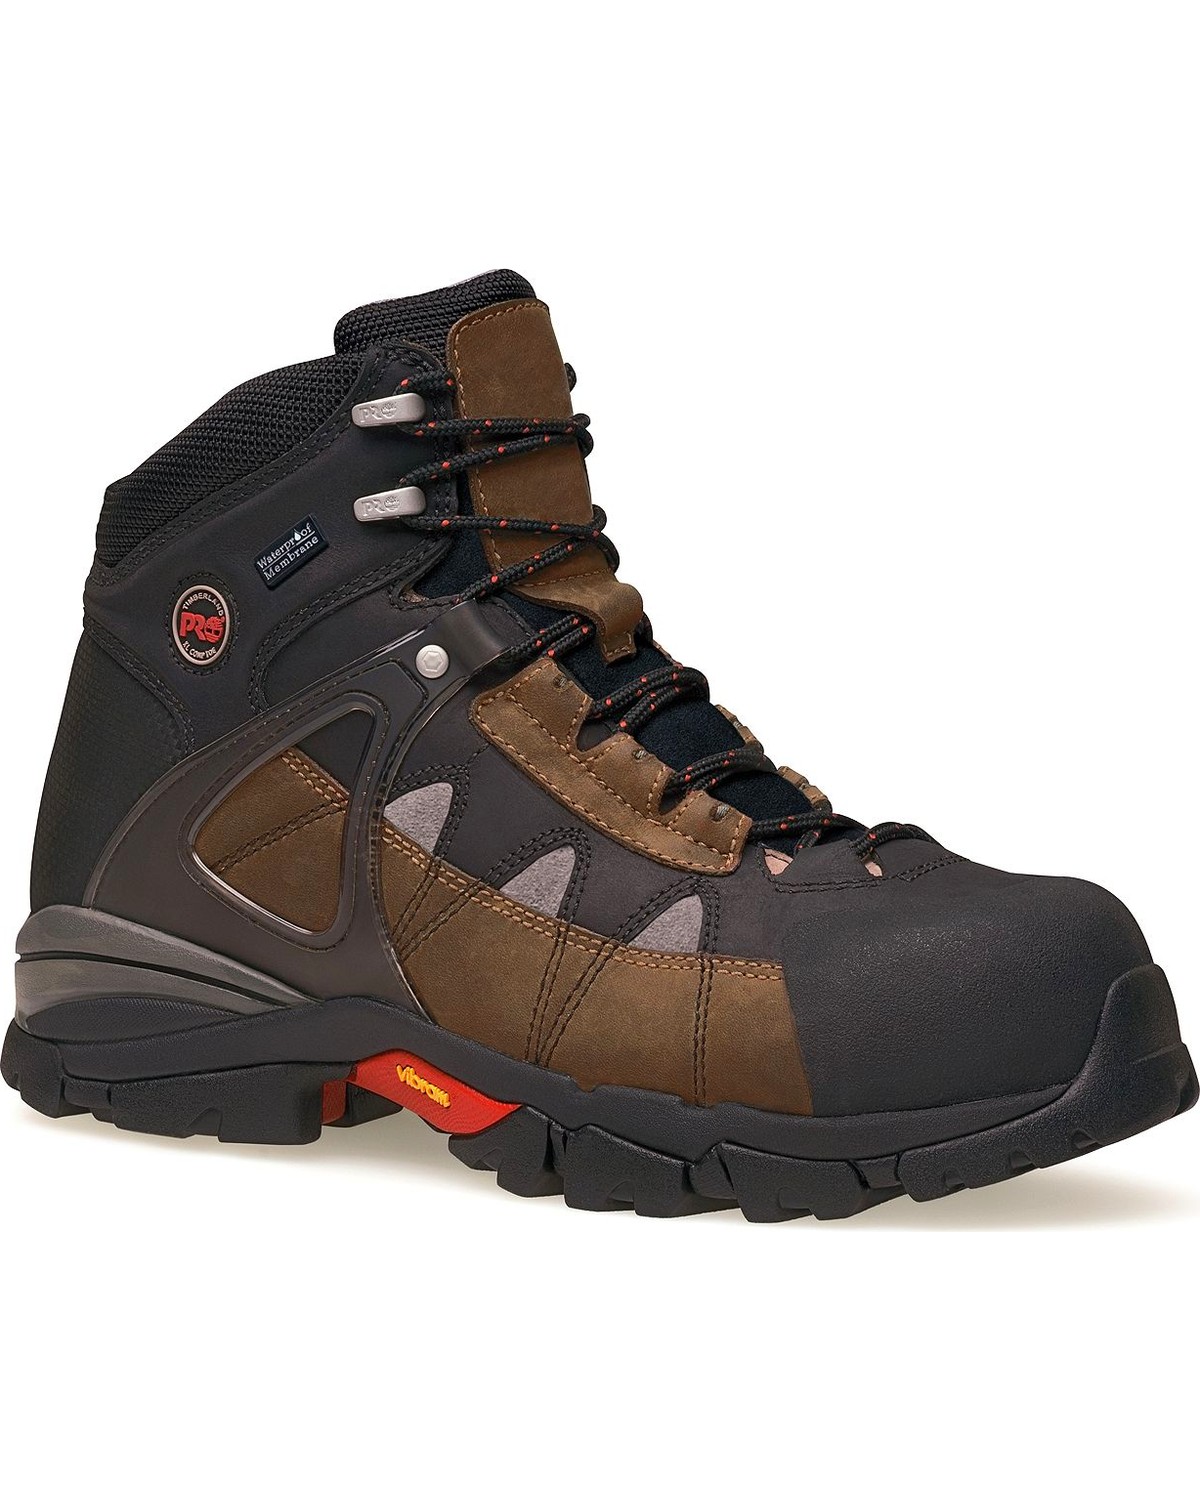 Timberland Pro Men's Hyperion Waterproof Hiking Boots - Alloy Toe